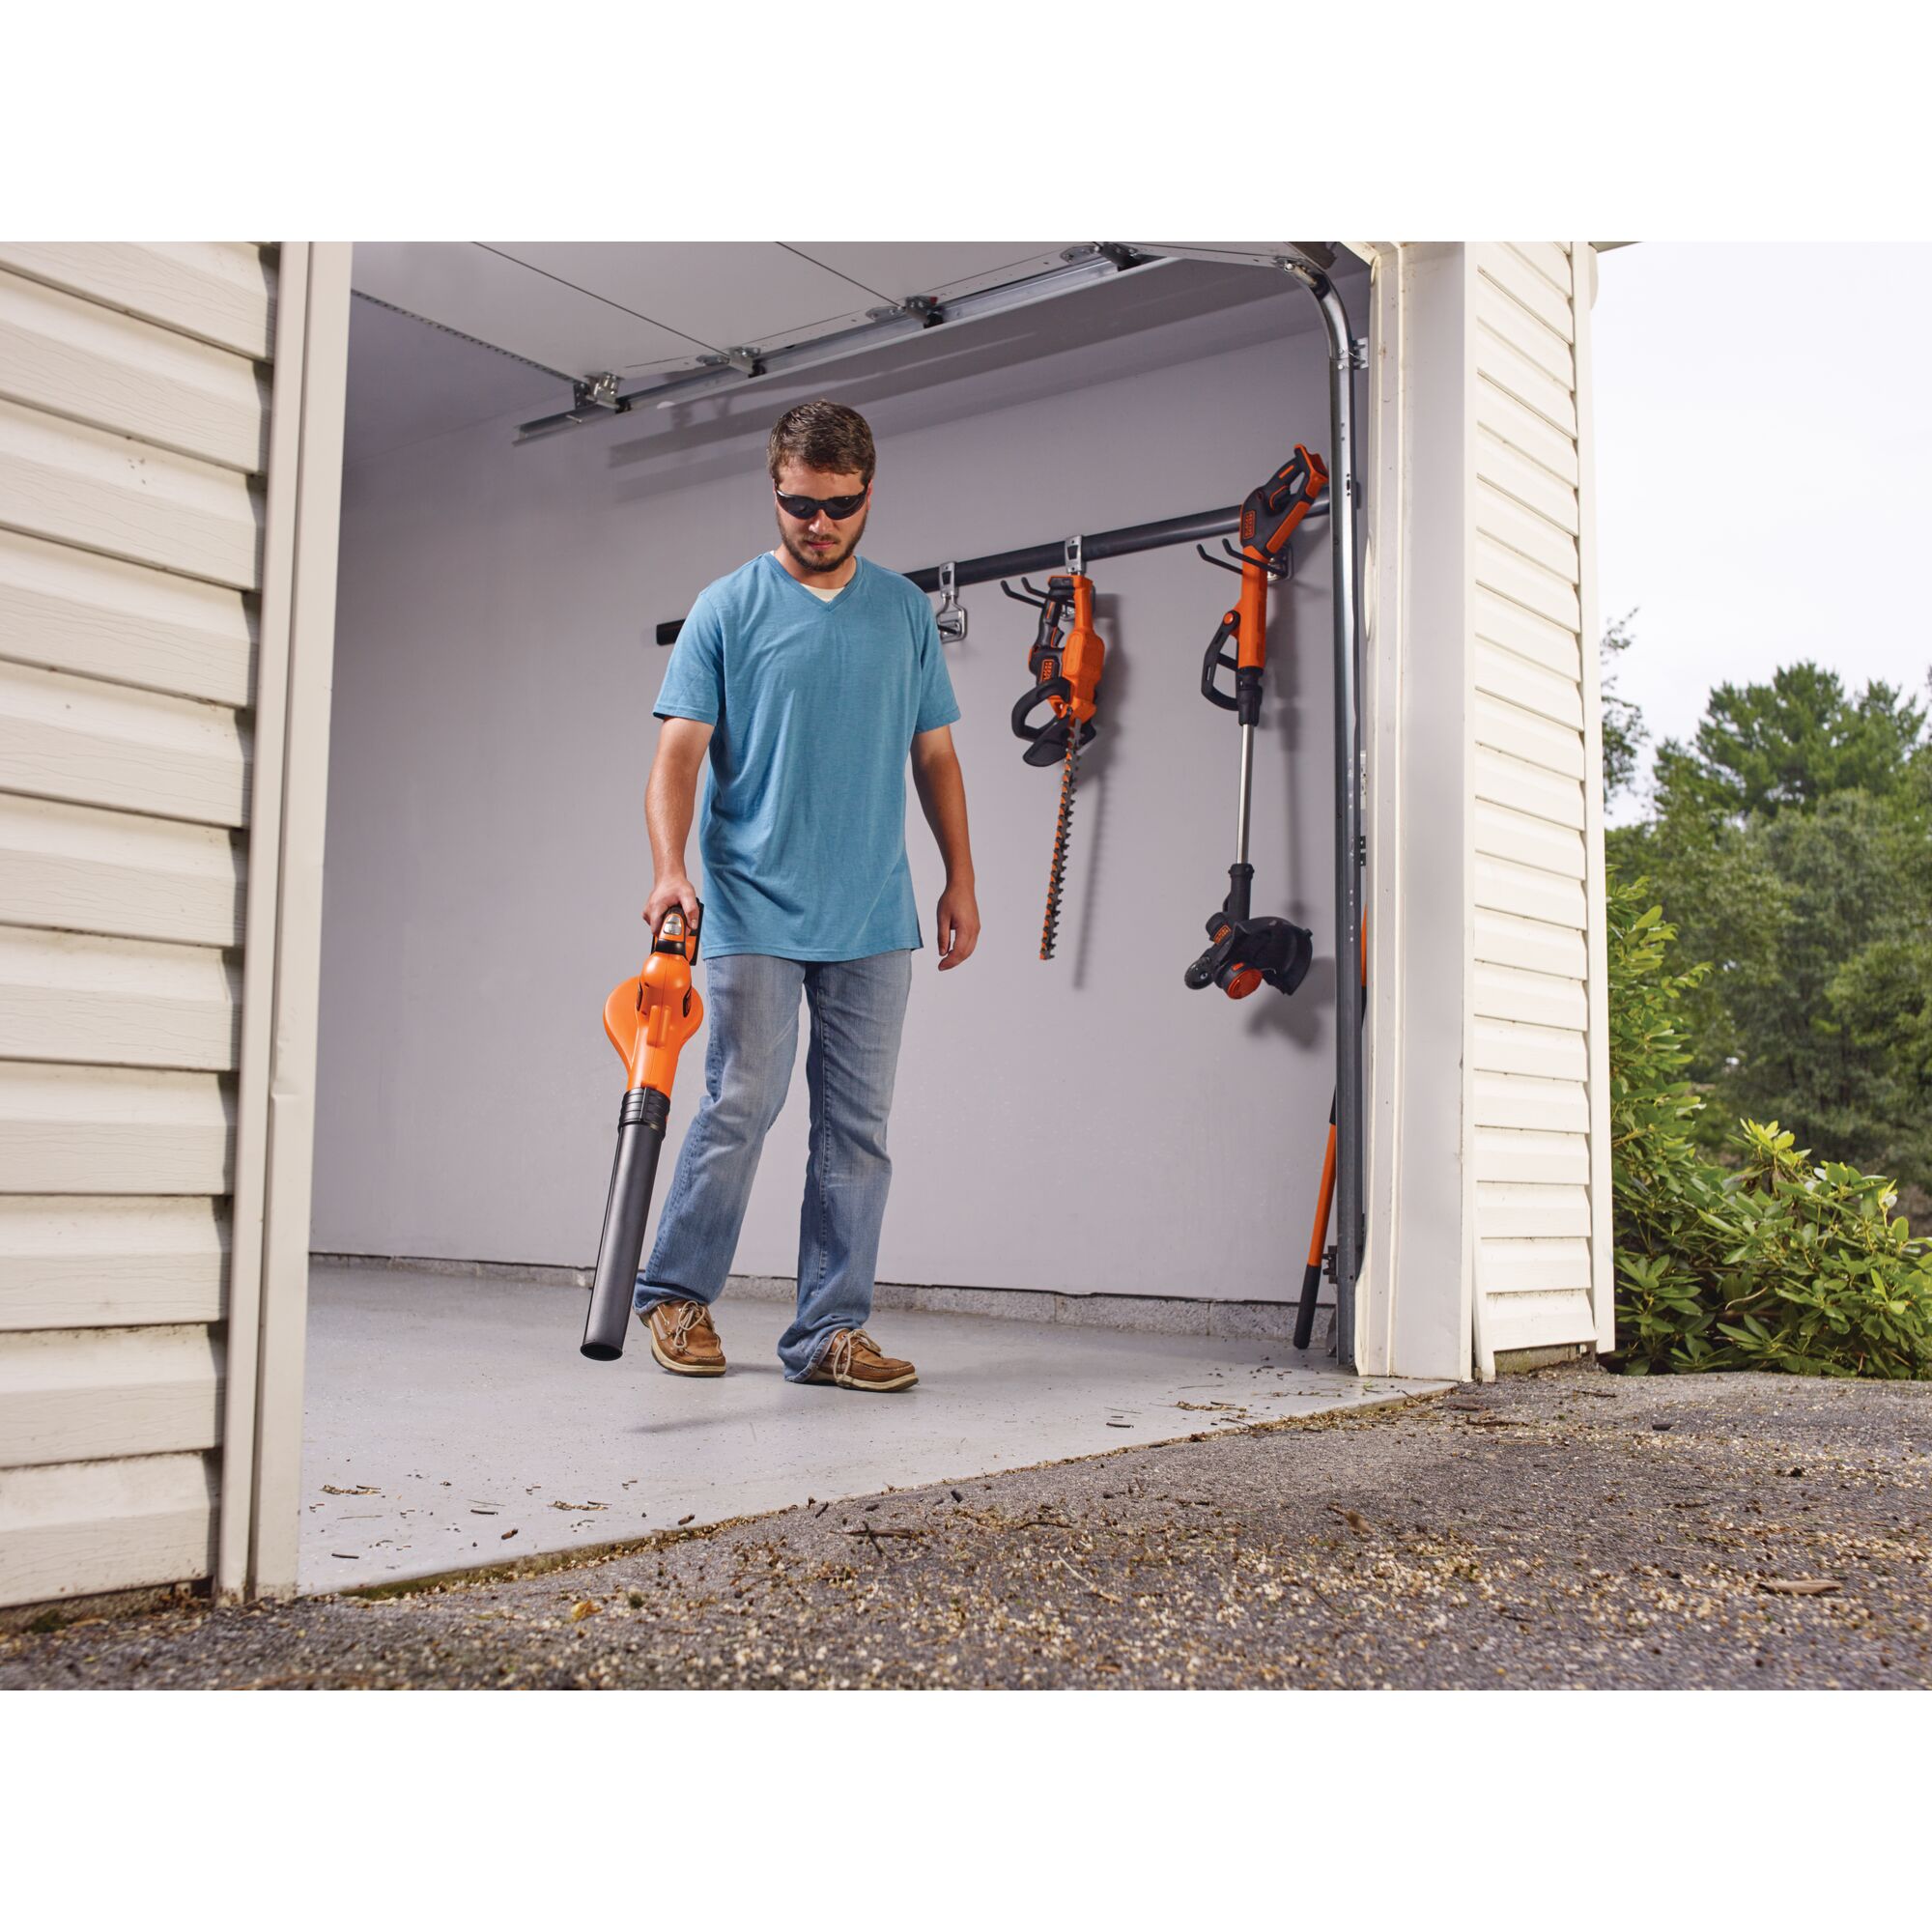 Man clearing debris from a garage with the 20V Max Lithium Powerboost Sweeper.